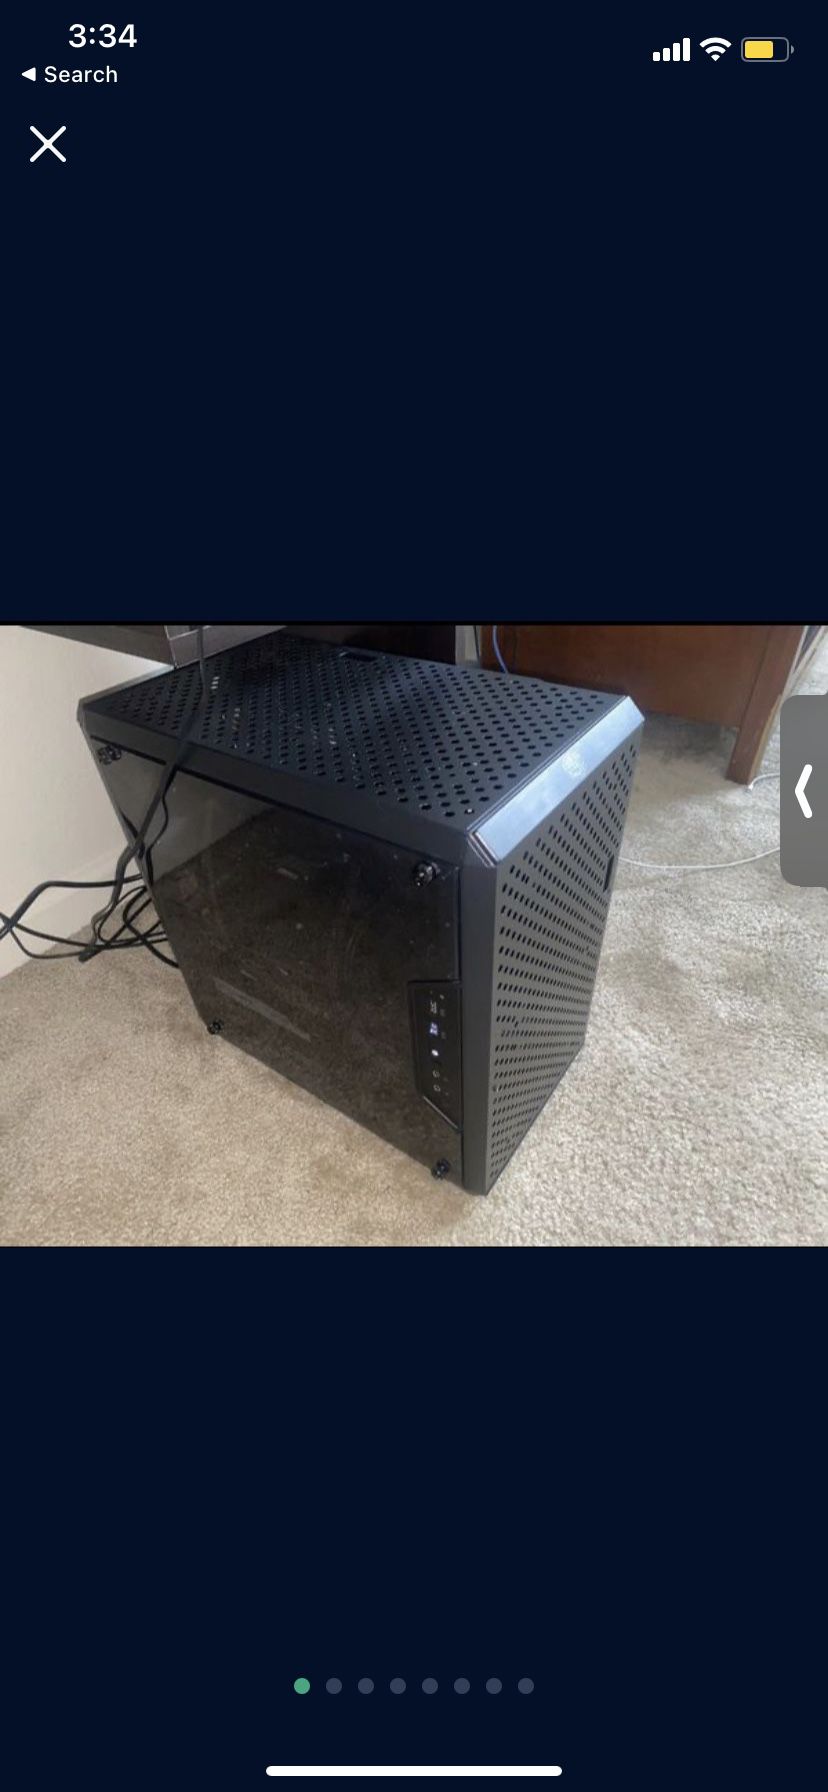 Gaming Pc Runs Anything Ultra! Warzone 80-100 Fps Ultra, Fortnite 100+ Ultra, Anything